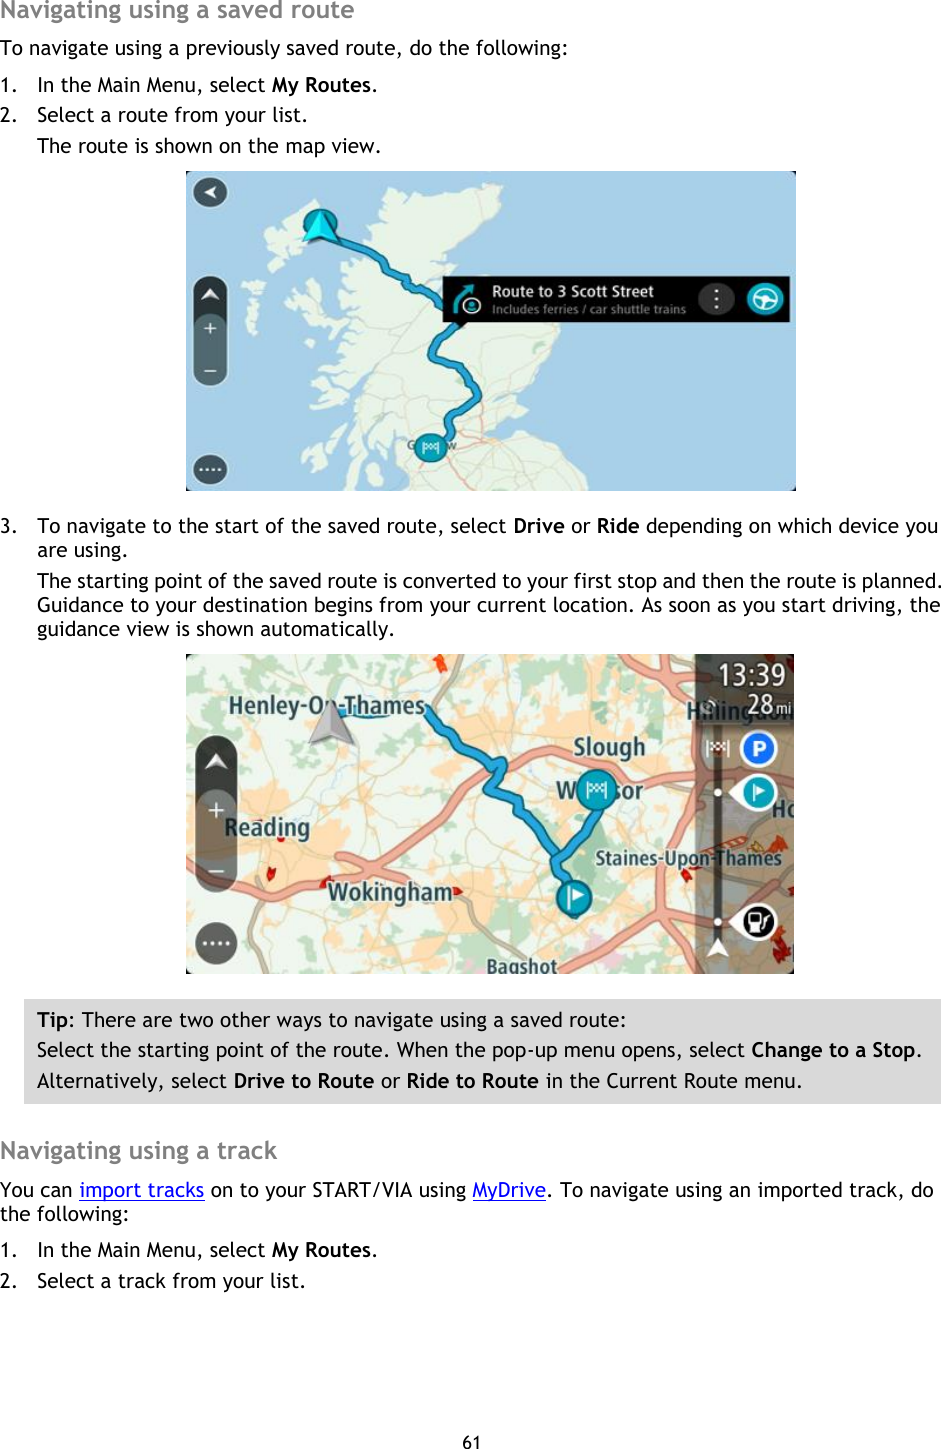 61    Navigating using a saved route To navigate using a previously saved route, do the following: 1. In the Main Menu, select My Routes. 2. Select a route from your list. The route is shown on the map view.  3. To navigate to the start of the saved route, select Drive or Ride depending on which device you are using. The starting point of the saved route is converted to your first stop and then the route is planned. Guidance to your destination begins from your current location. As soon as you start driving, the guidance view is shown automatically.  Tip: There are two other ways to navigate using a saved route: Select the starting point of the route. When the pop-up menu opens, select Change to a Stop. Alternatively, select Drive to Route or Ride to Route in the Current Route menu.  Navigating using a track You can import tracks on to your START/VIA using MyDrive. To navigate using an imported track, do the following: 1. In the Main Menu, select My Routes. 2. Select a track from your list. 